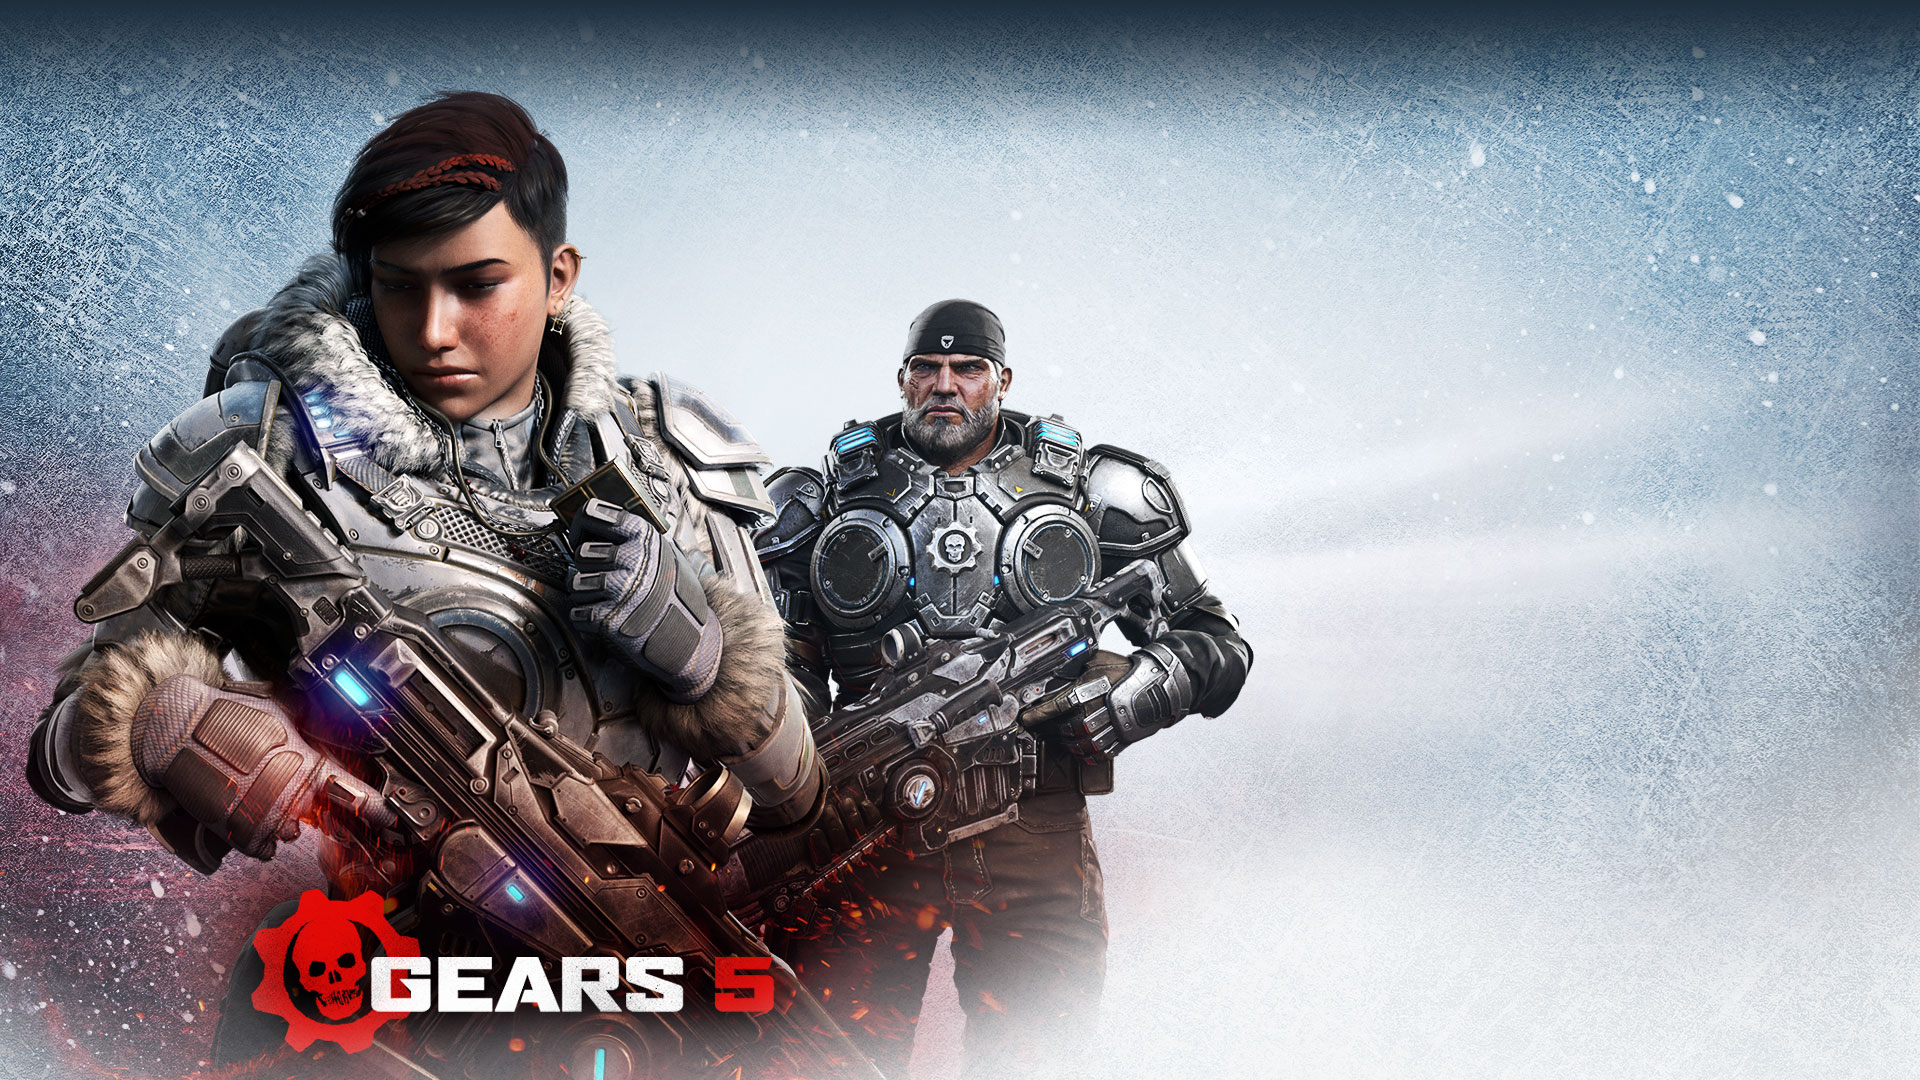 Gears 5 Game Subscription